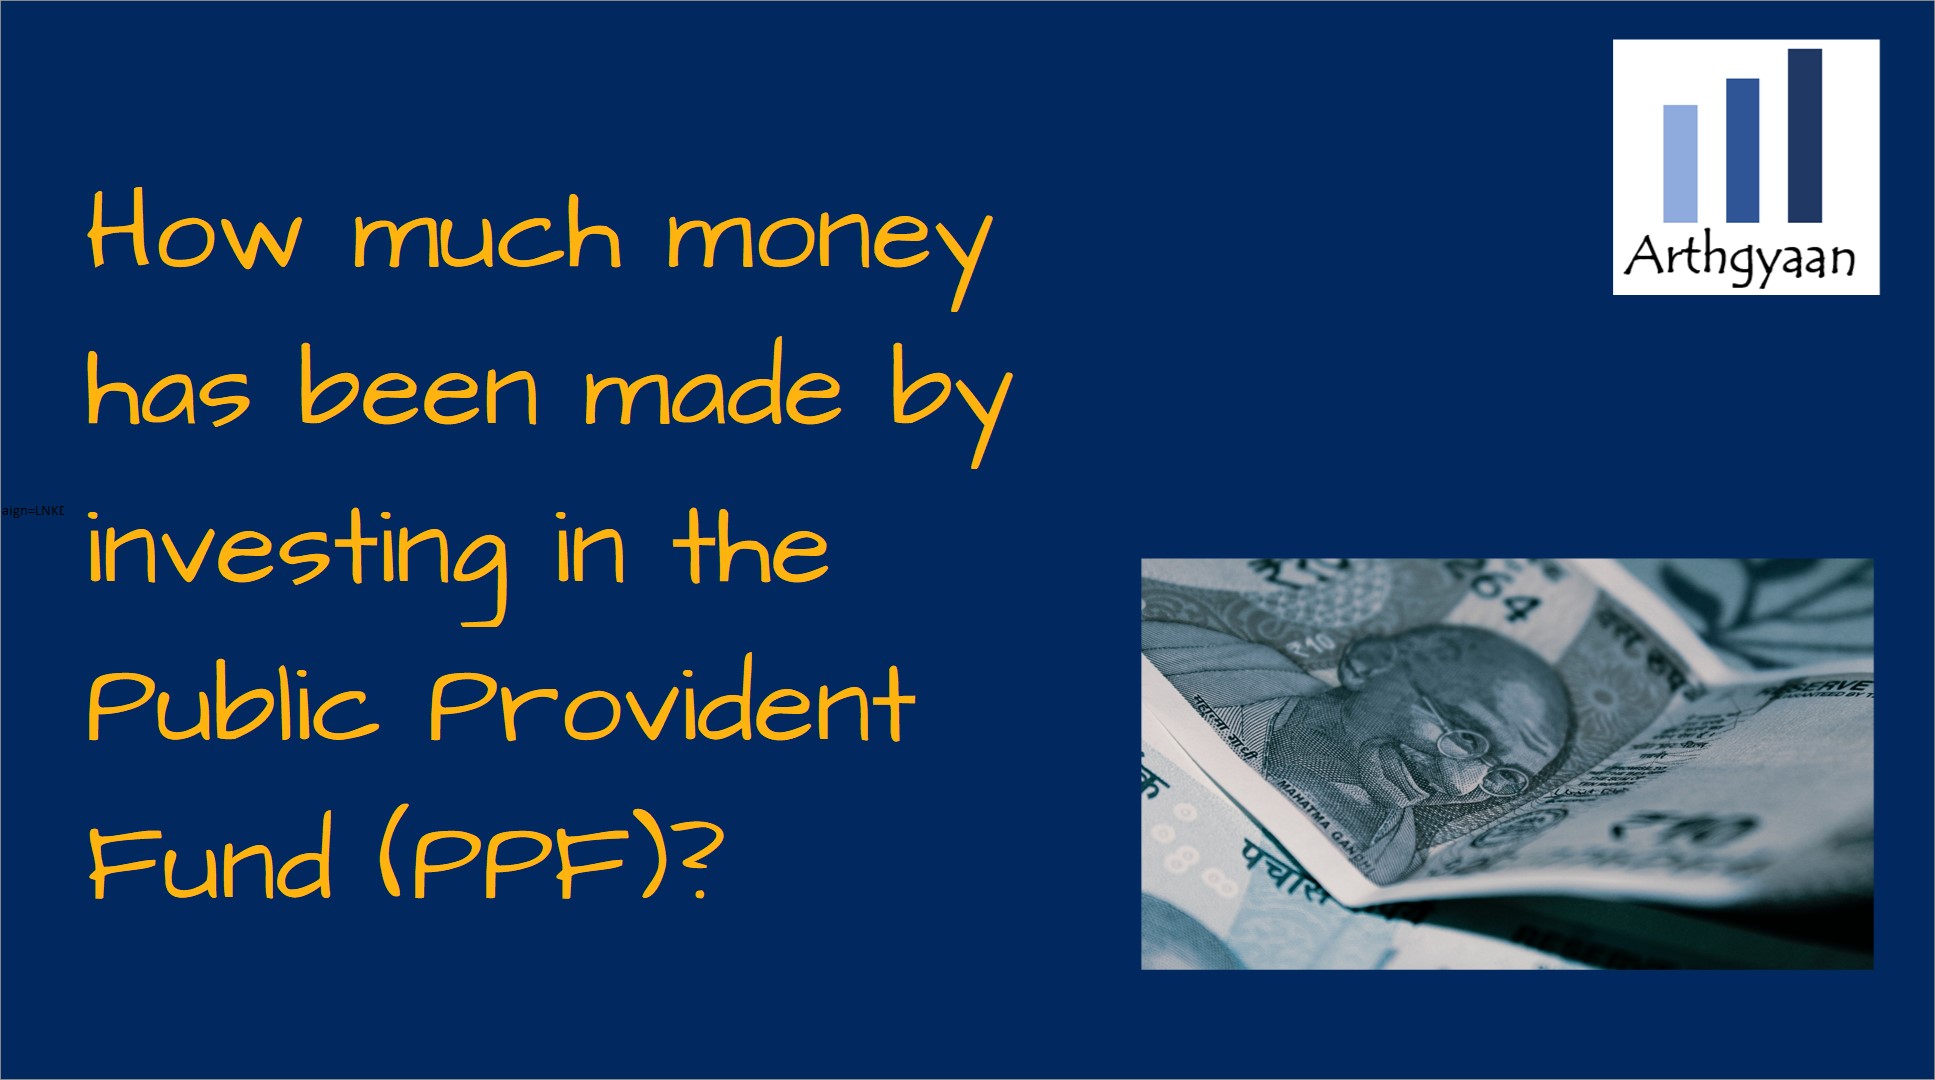 How much money has been made by investing in the Public Provident Fund (PPF)?